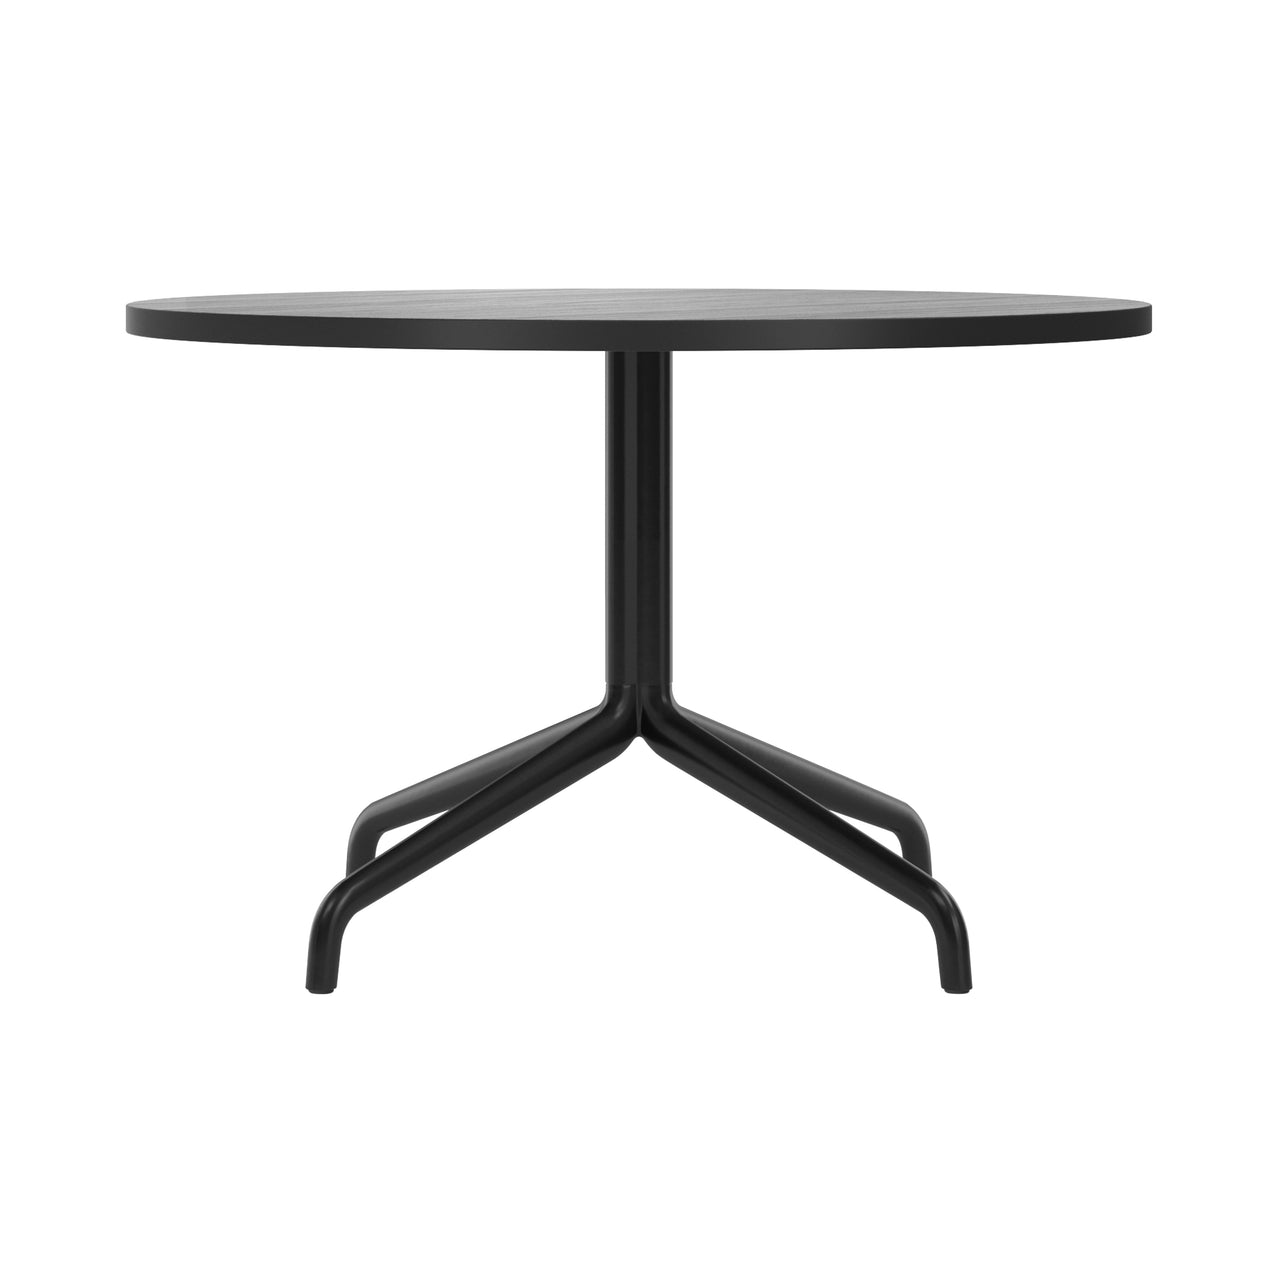 Harbour Column Lounge Table: Black Stained Oak